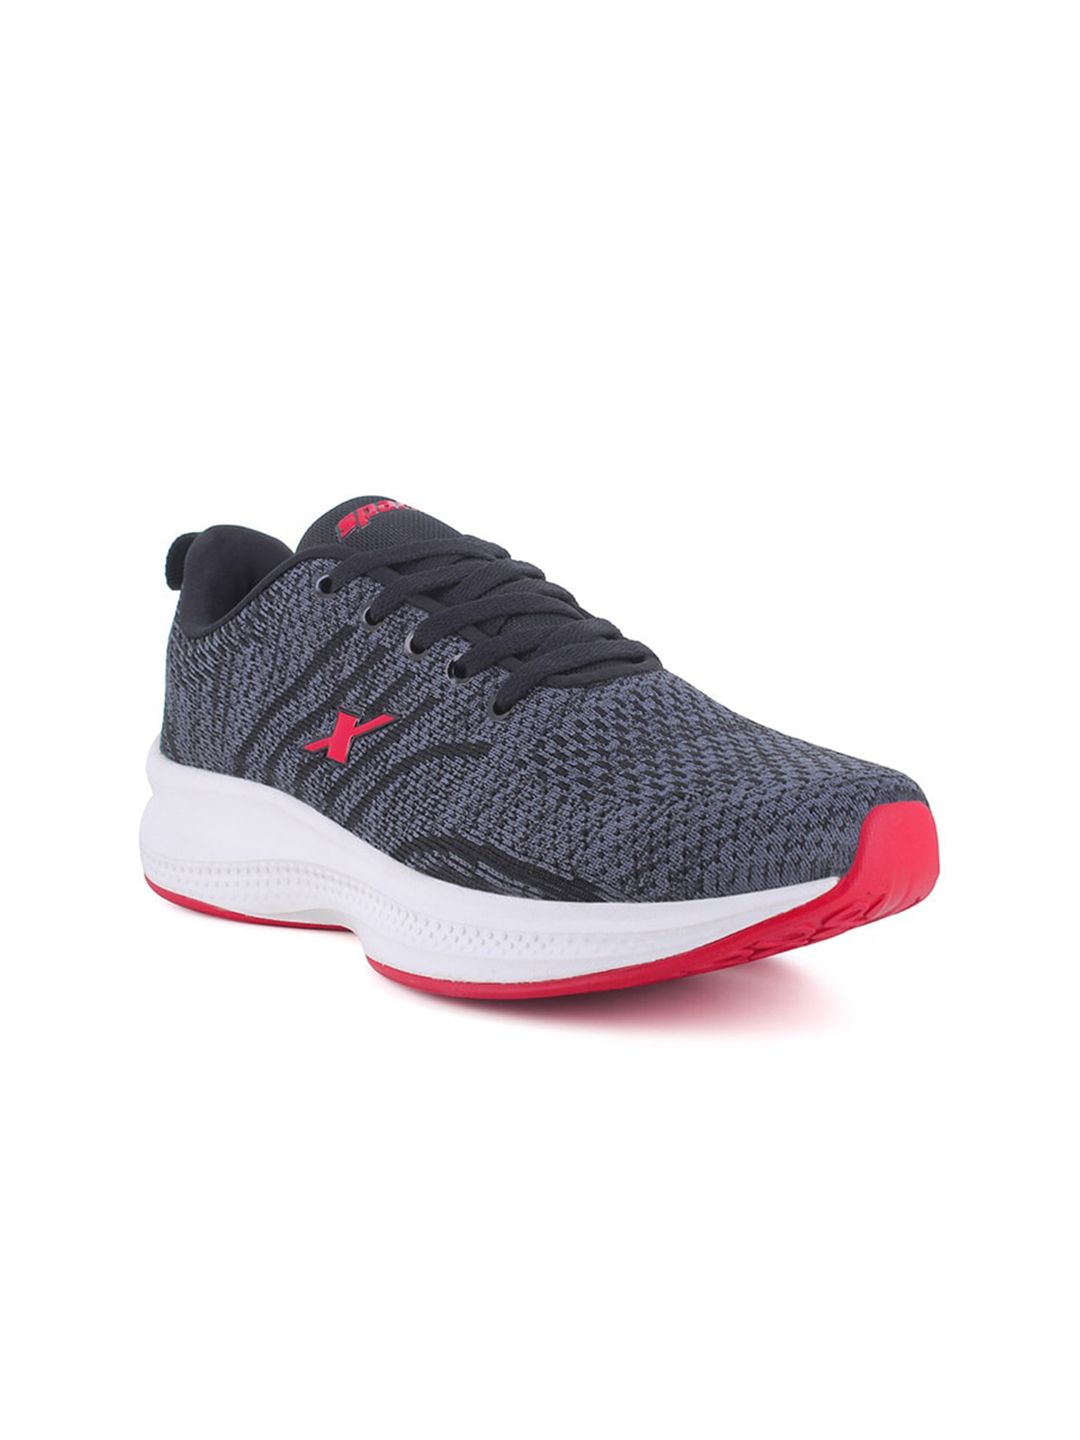 Sparx Women SL-212 Non-Marking Running Shoes Price in India